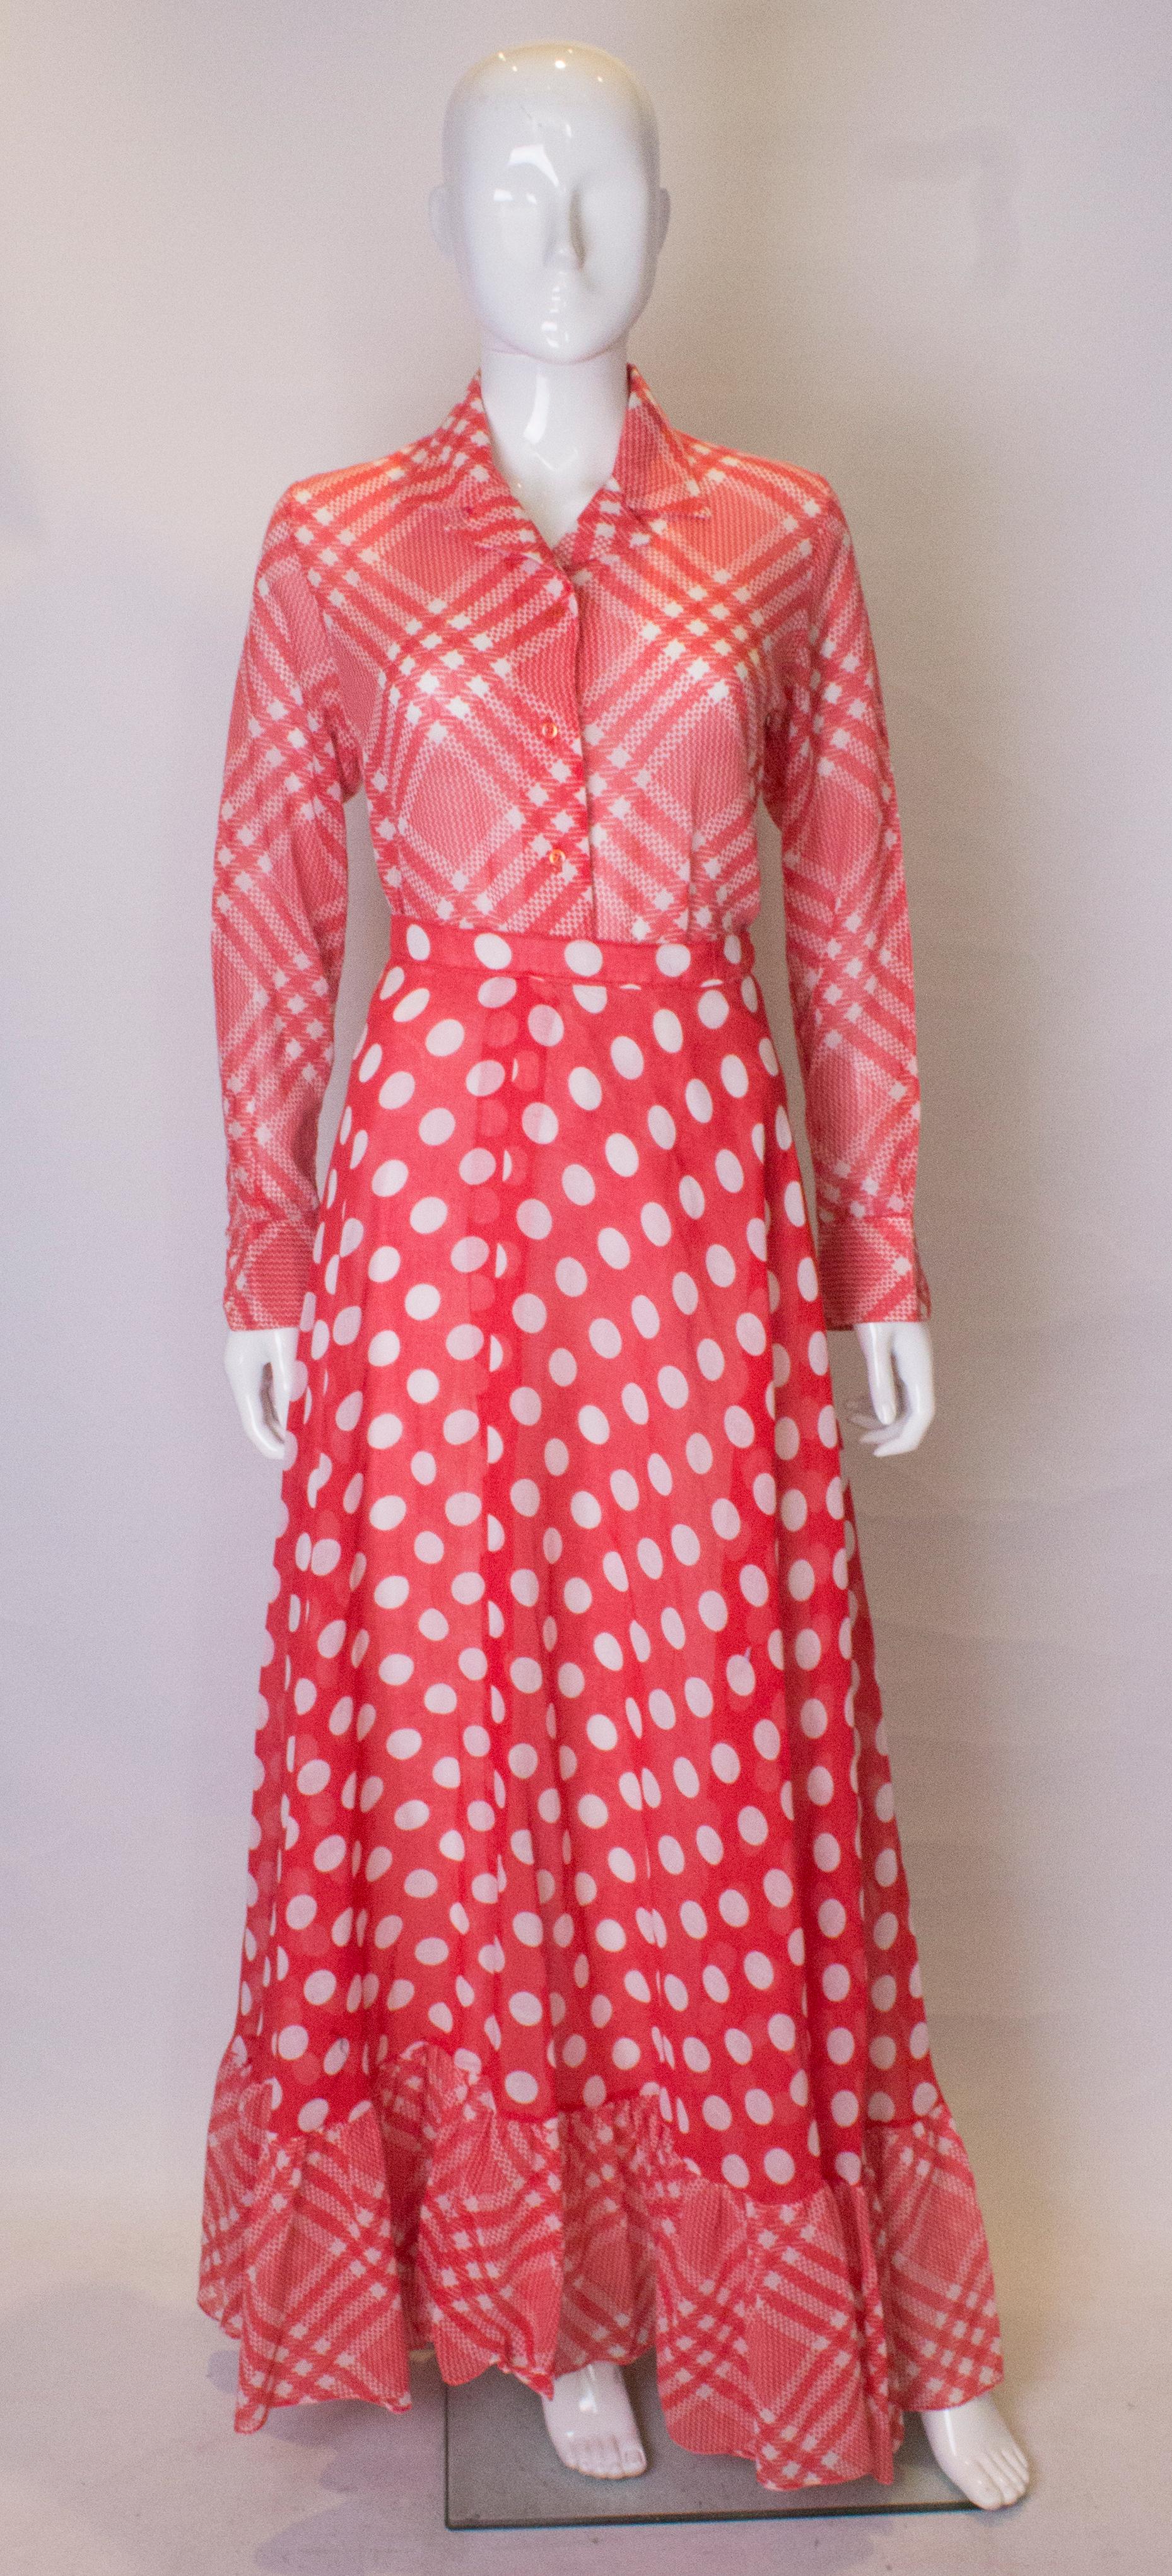 A chic two piece for Spring /Summer.  The shirt has a cut away collar and button opening front  and cuffs, in an attractive red and white check.  The full  length skirt is lined, and has a polka dot body and check frill at the hem.

Measurements: